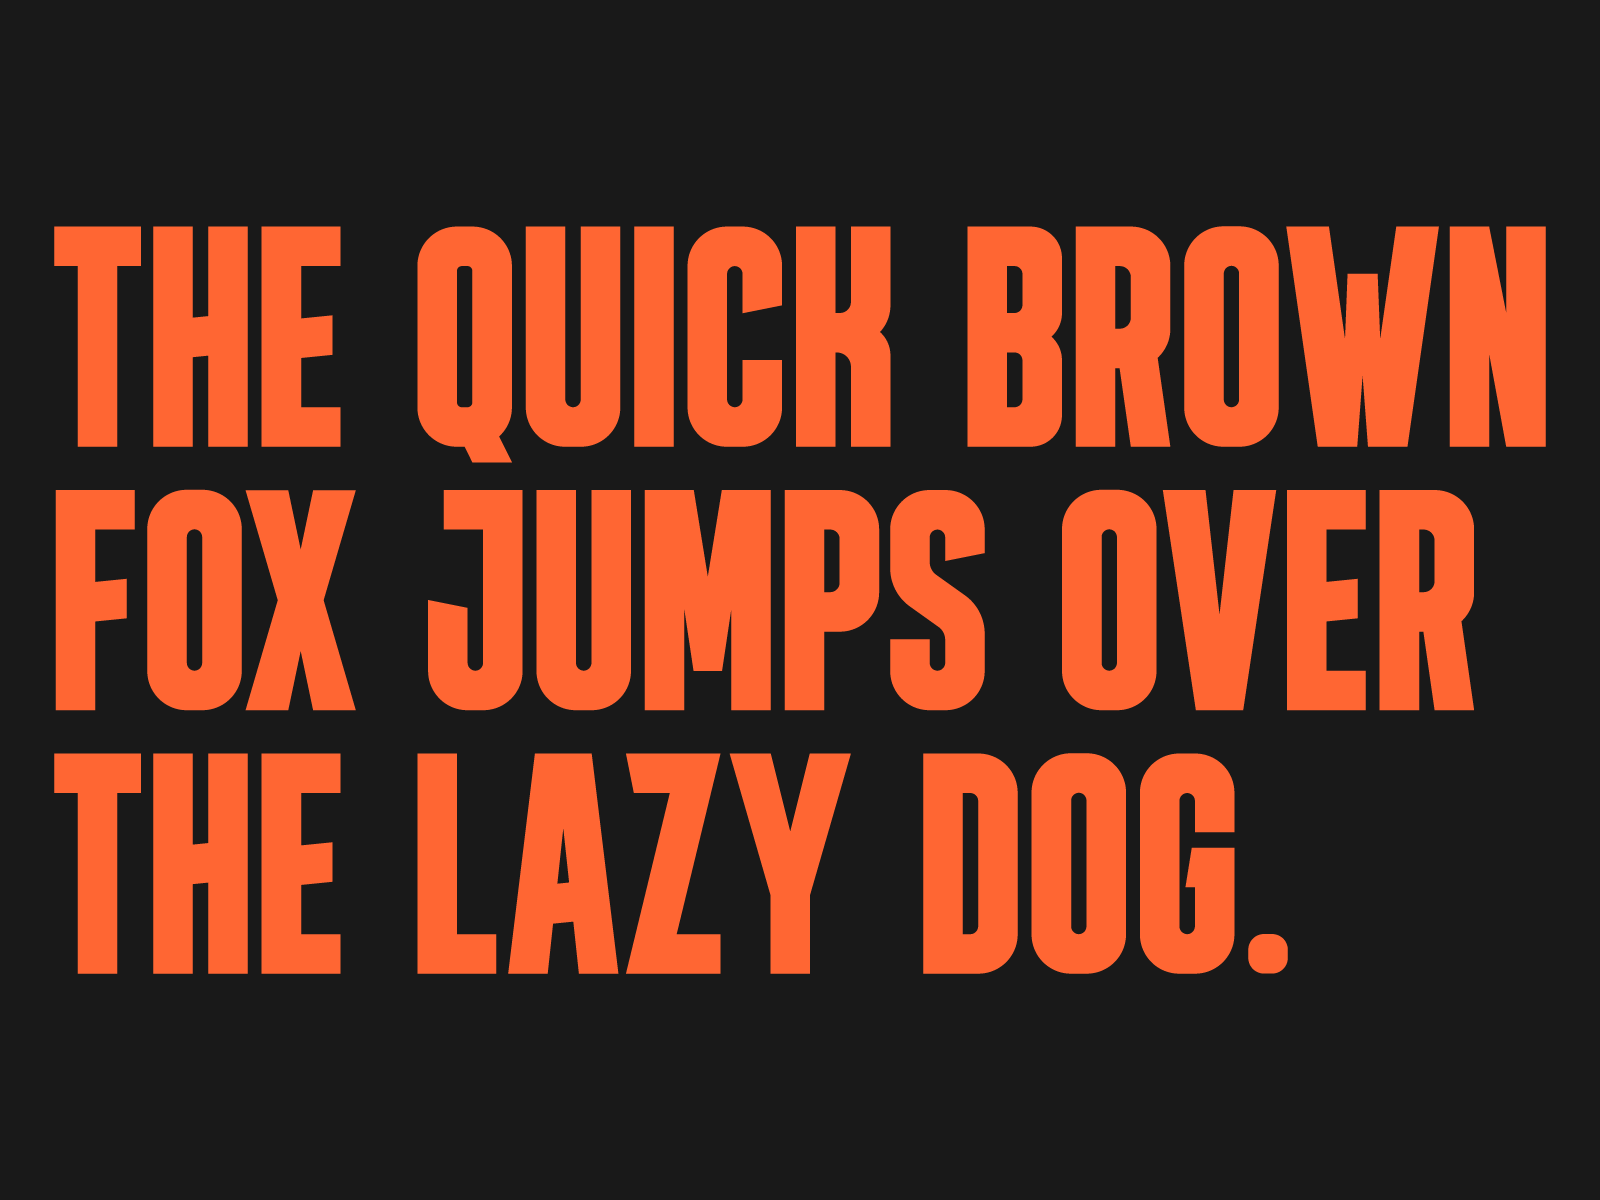 SUPR - Bold Condensed Font by Brandon Frederickson on Dribbble